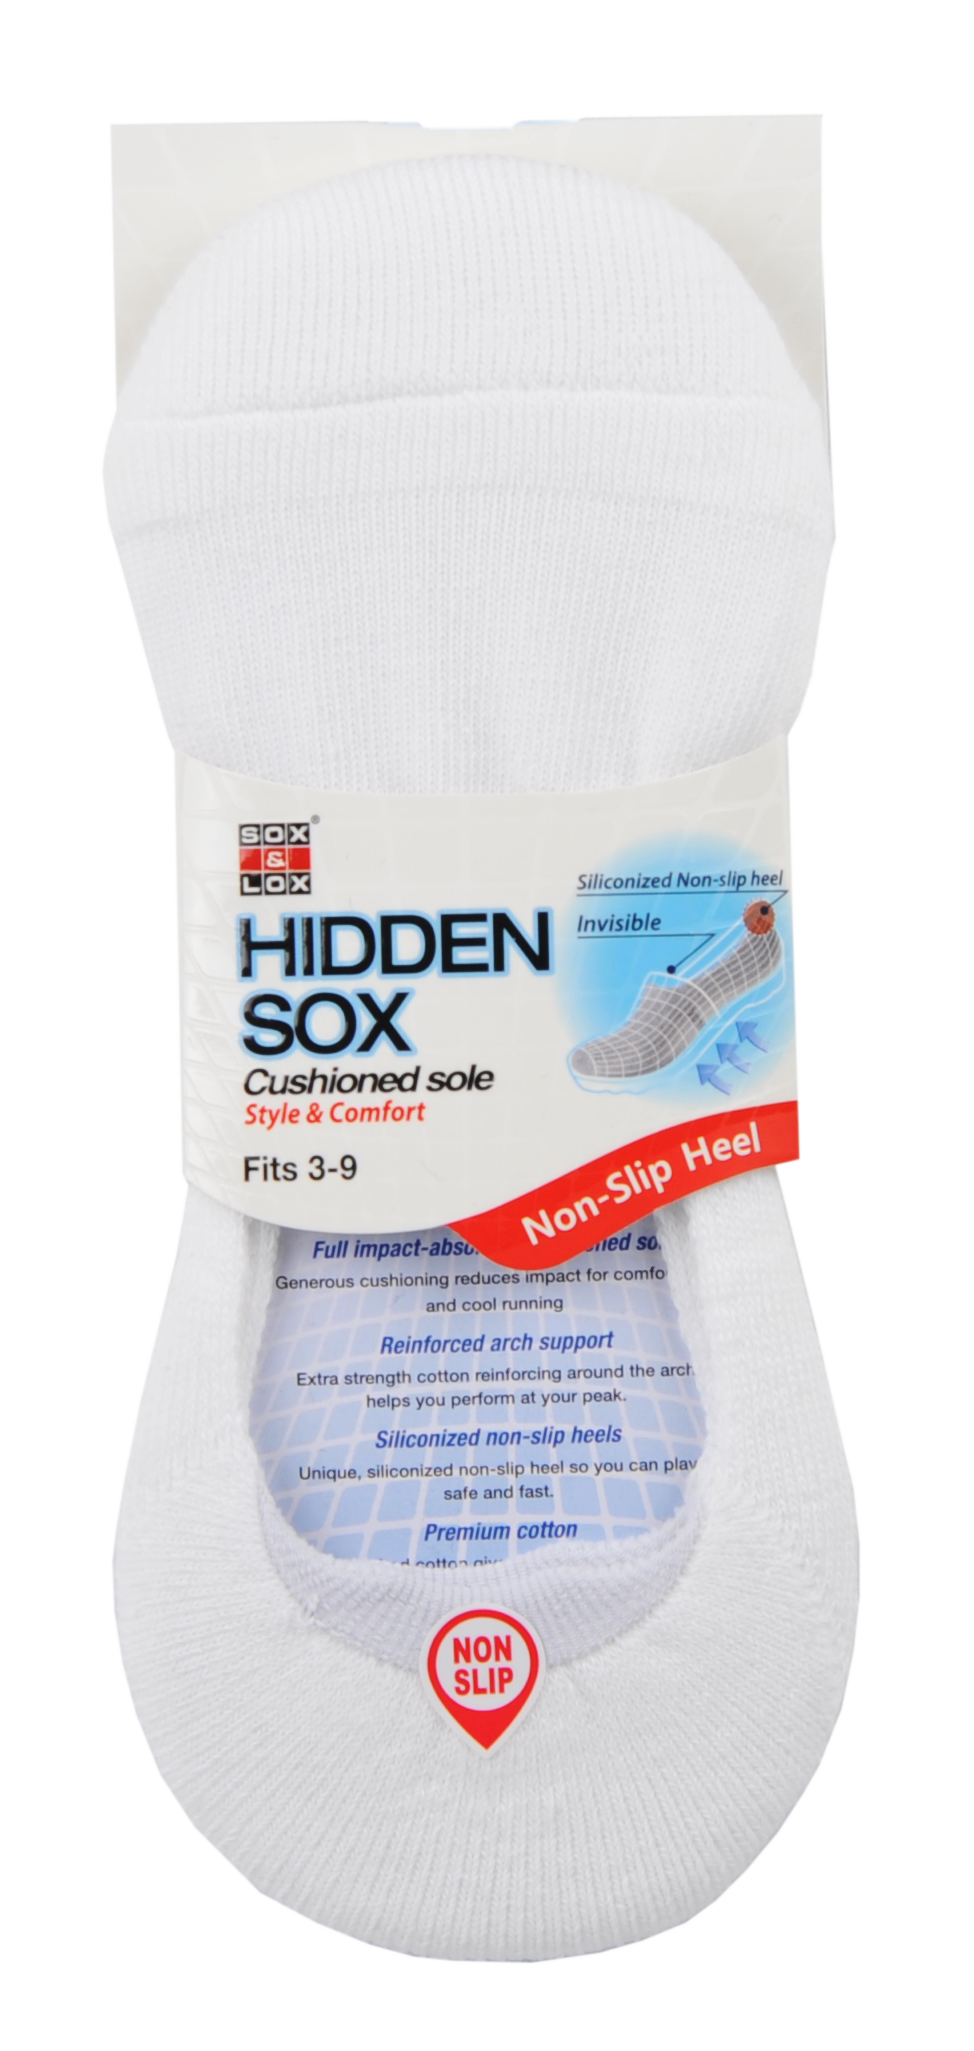 Ladies' Sports Cushioned Hidden Best Selling Products SOX&LOX